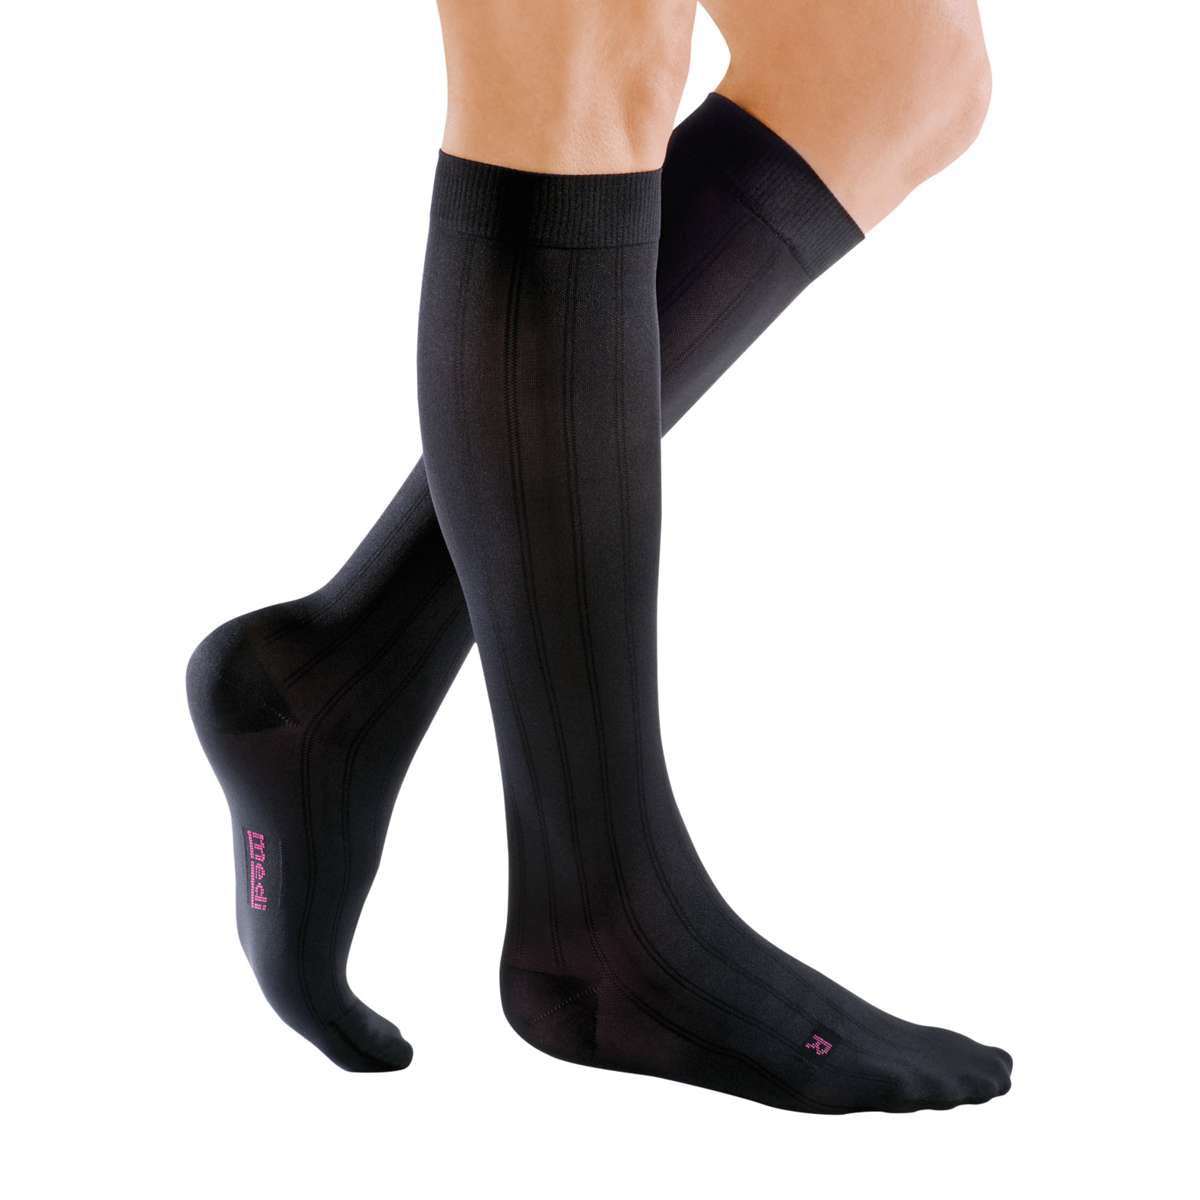 mediven for men classic 20-30 mmHg Calf High Closed Toe Compression Stockings (Tall Length)